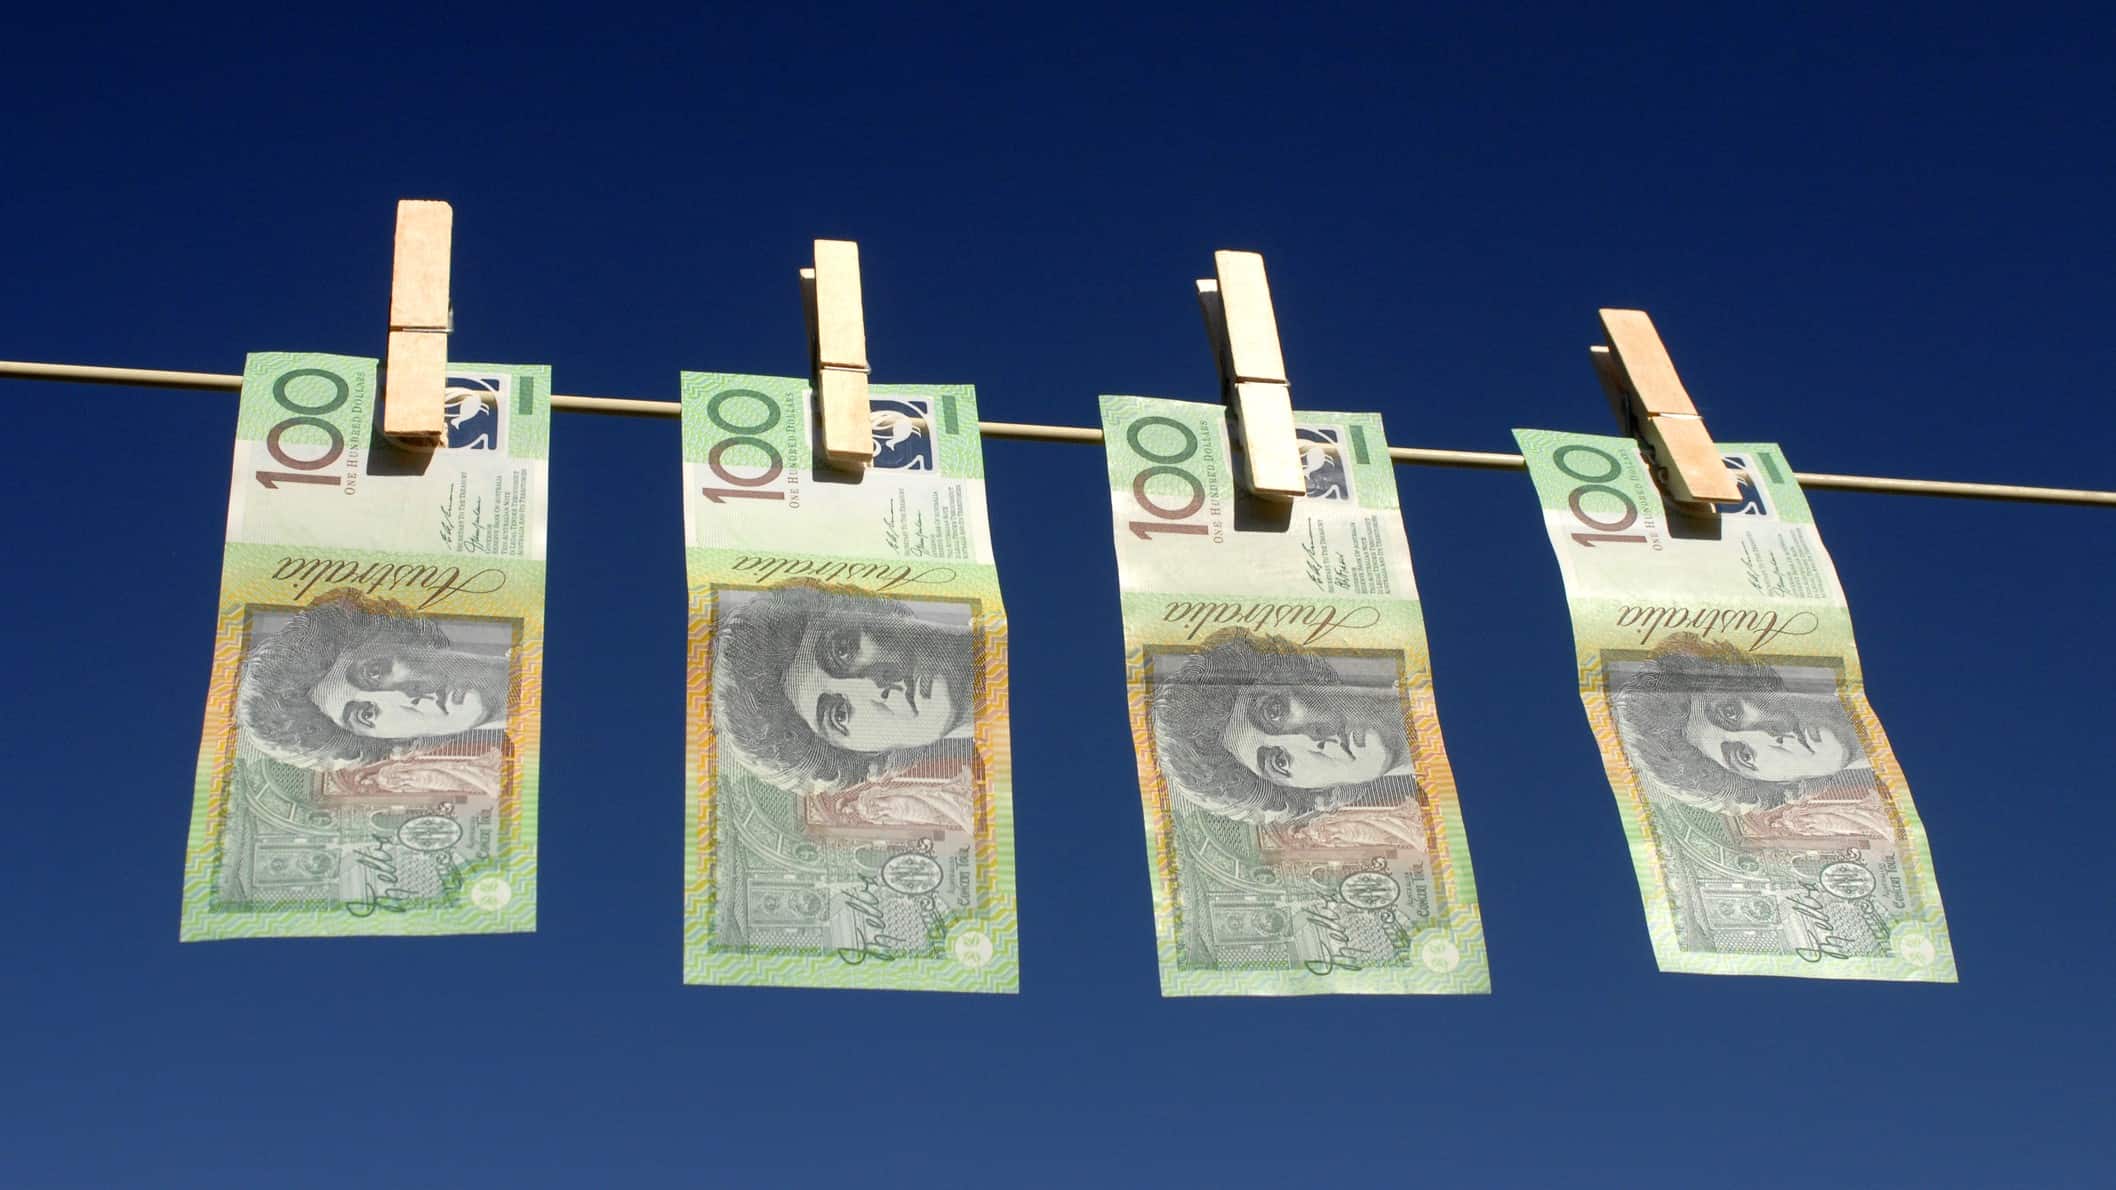 four one hundred dollar bills hang on a washing line with old-fashioned wooden pegs, denoting money laundering.